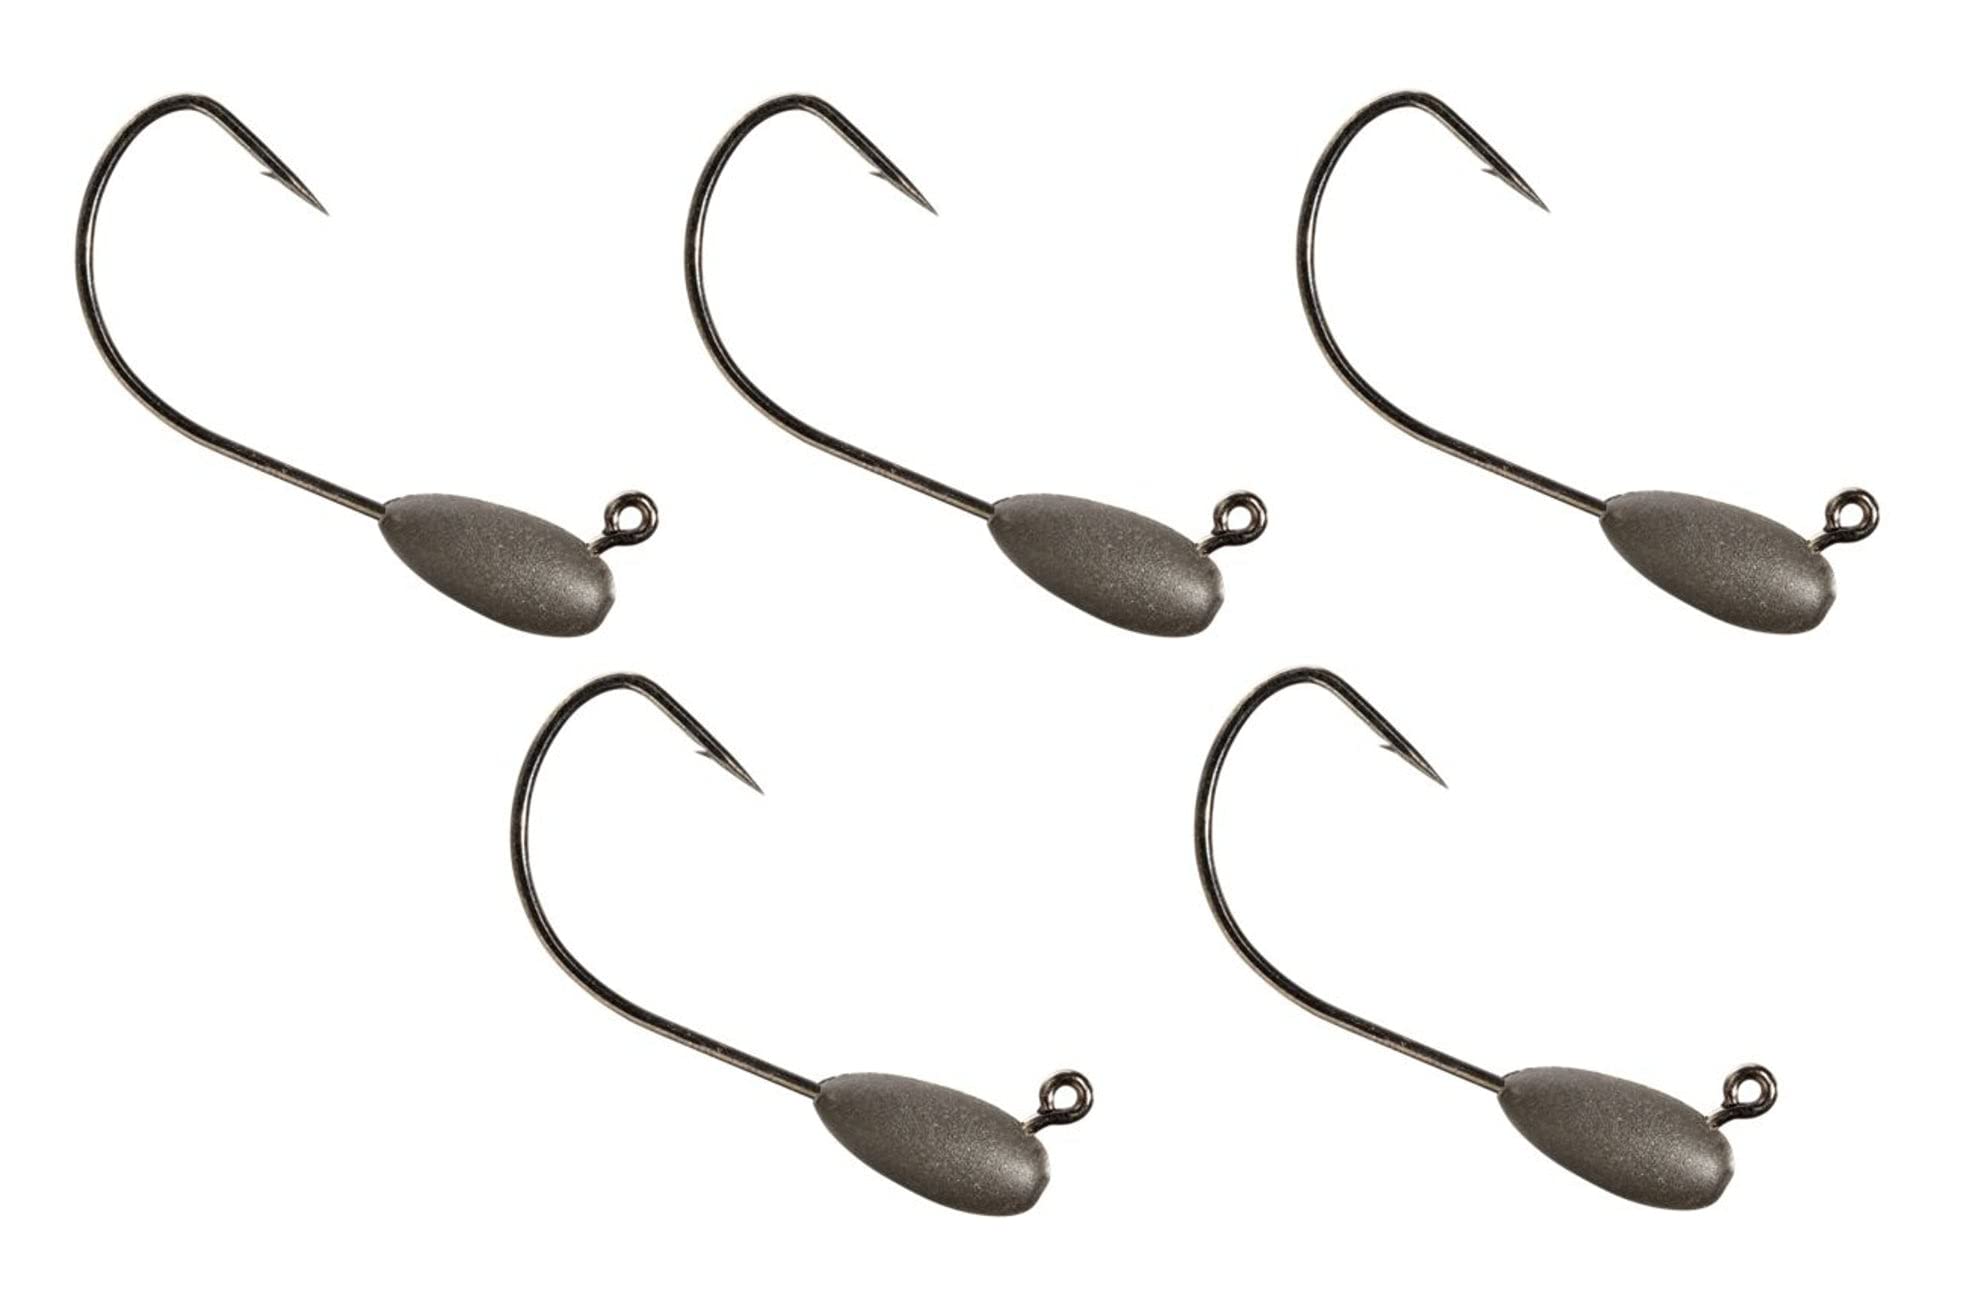 Reaction Tackle Tungsten Tube Jig Heads- 5-Pack- for Bass Fishing